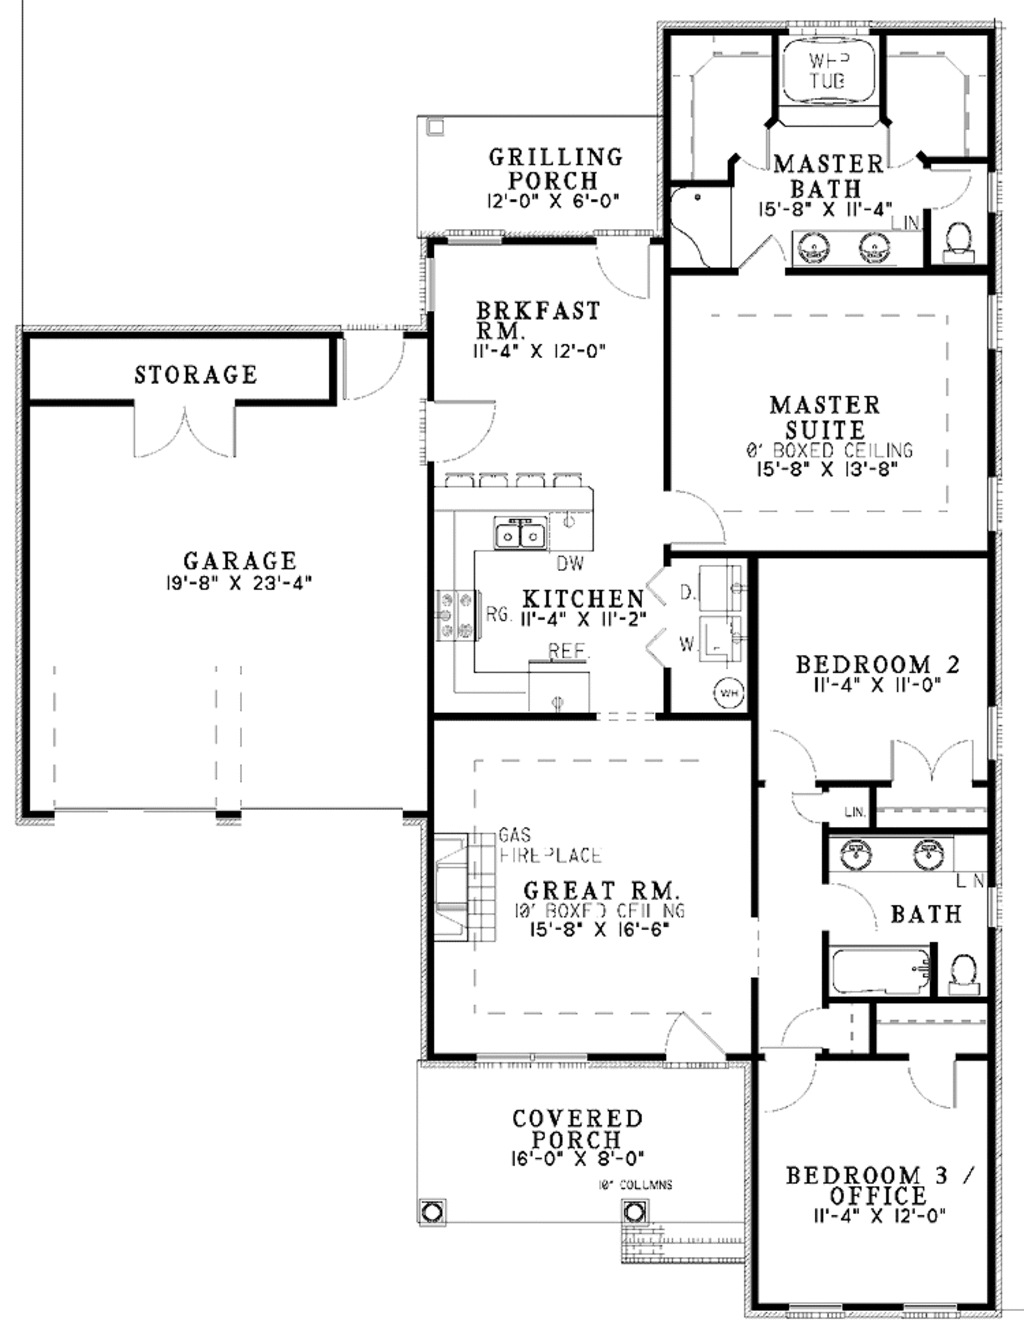 country-style-house-plan-3-beds-2-baths-1452-sq-ft-plan-17-3064